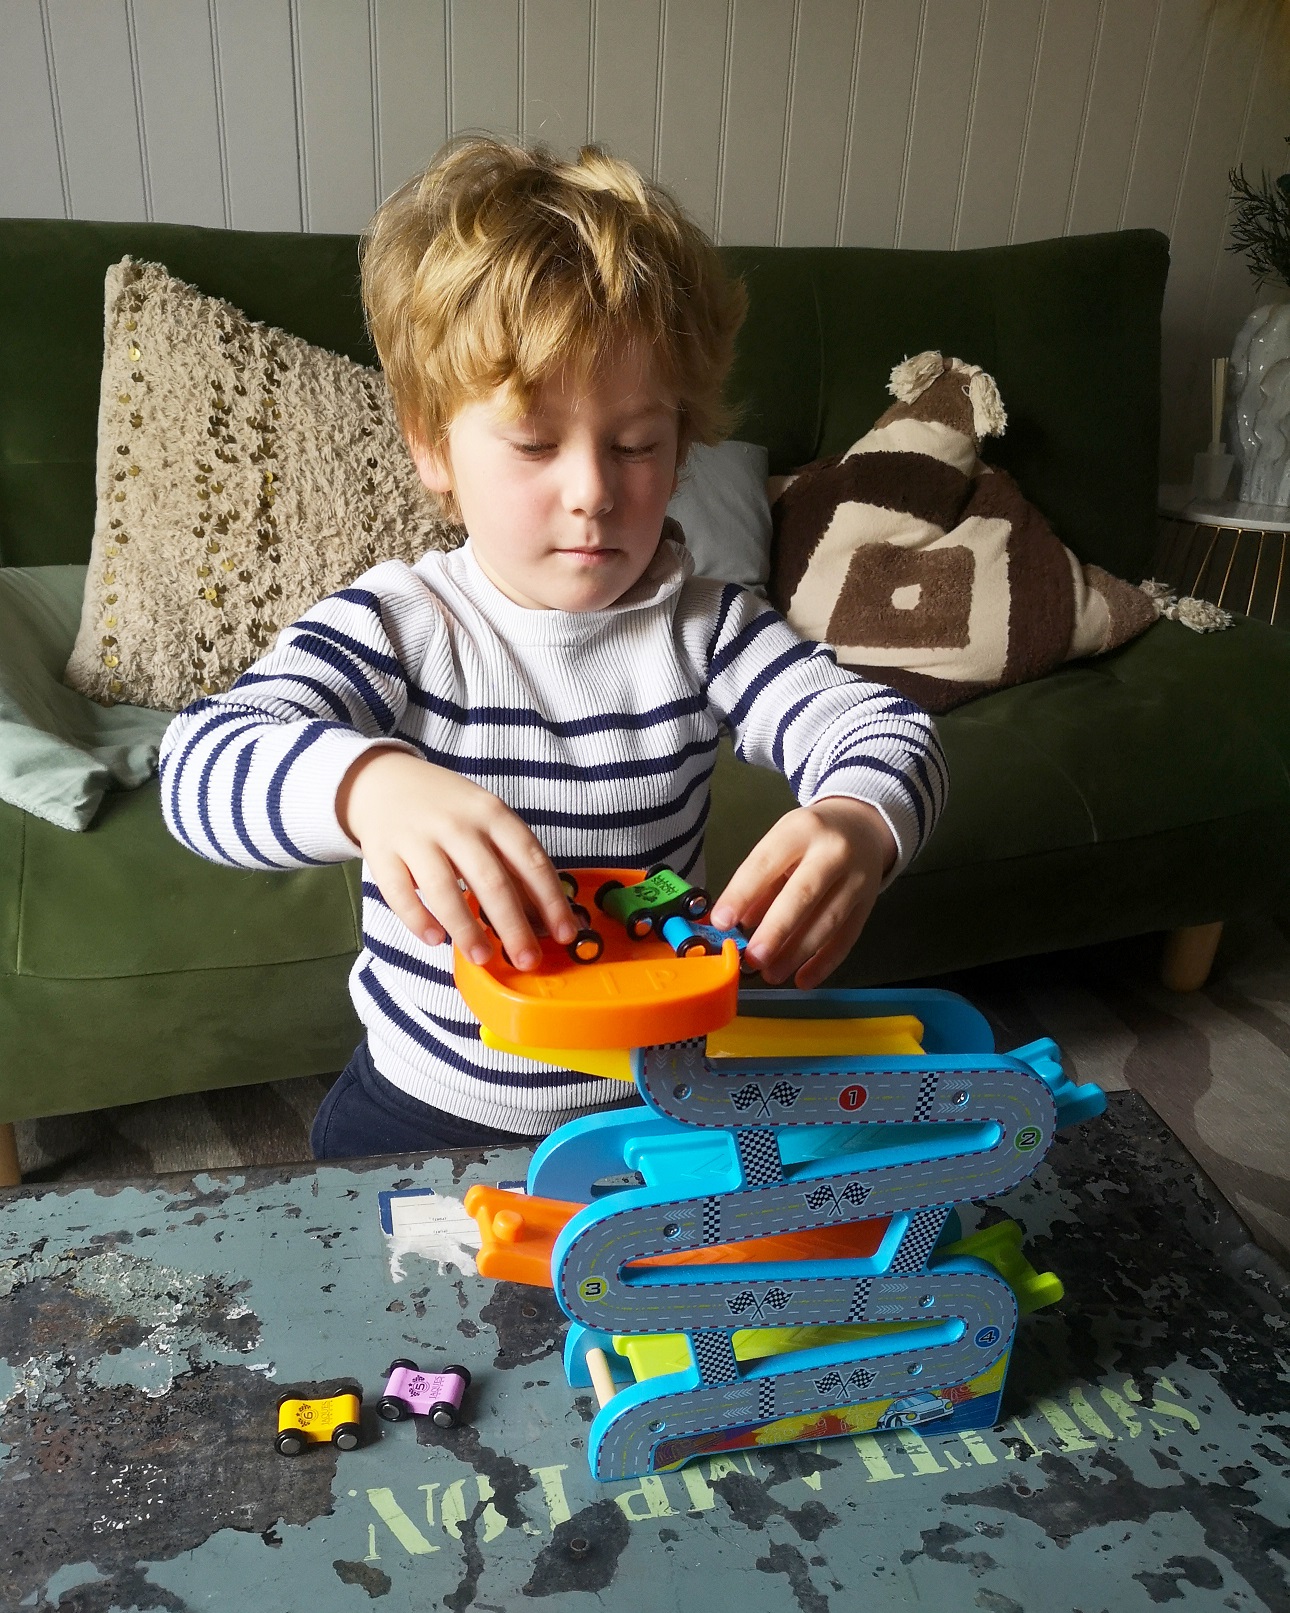 Jaques of London, Toys Company, Wooden Toys, Toymakers, Toys Review, Play and Learn, Learning Through Play, The Frenchie Mummy 